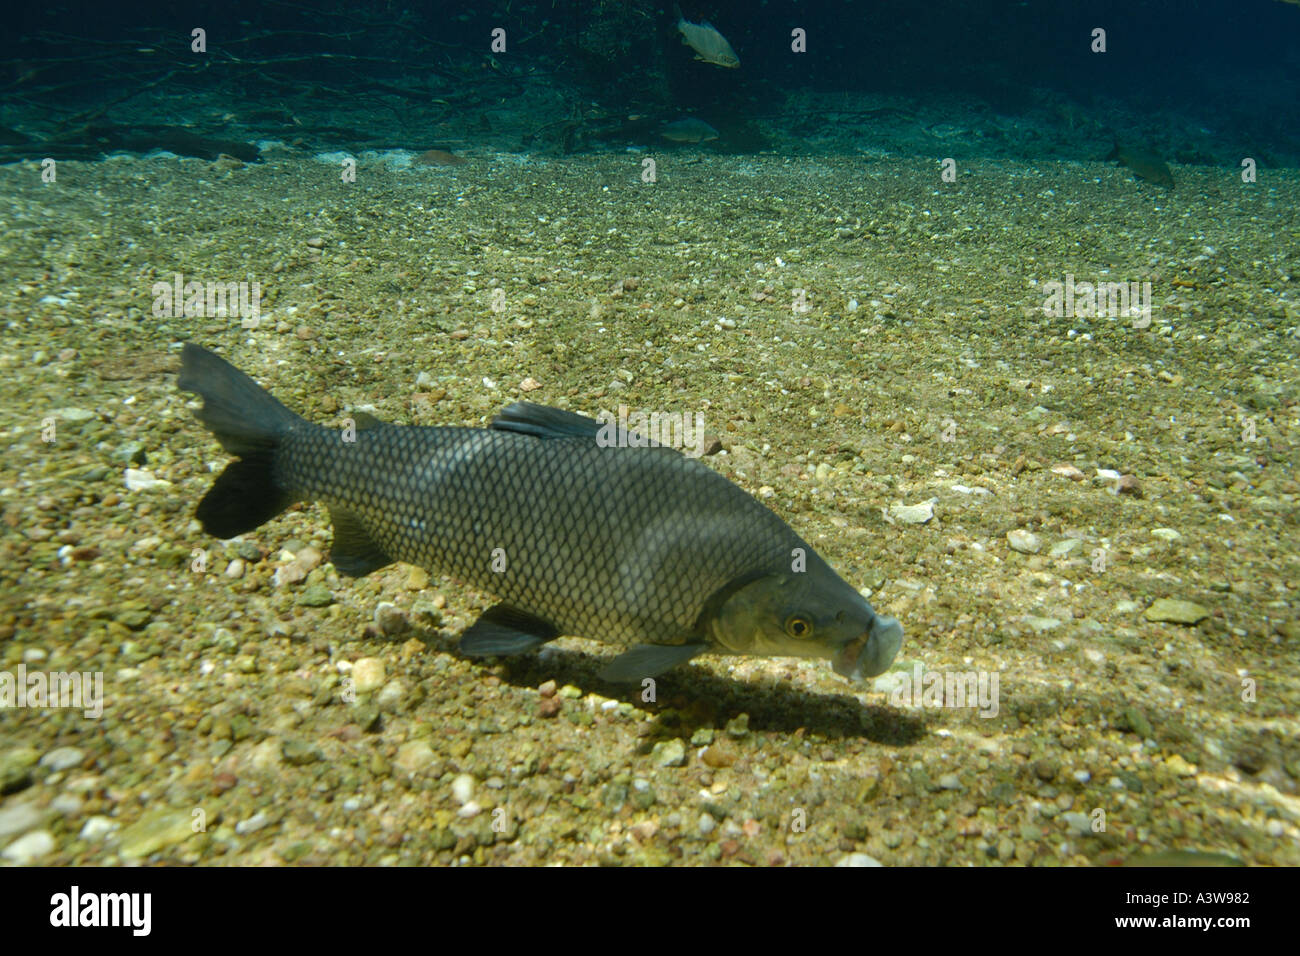 Curimbata with extended jaw Prochilodus lineatus natural freshwater spring preserve Prata river Bonito Brazil Stock Photo